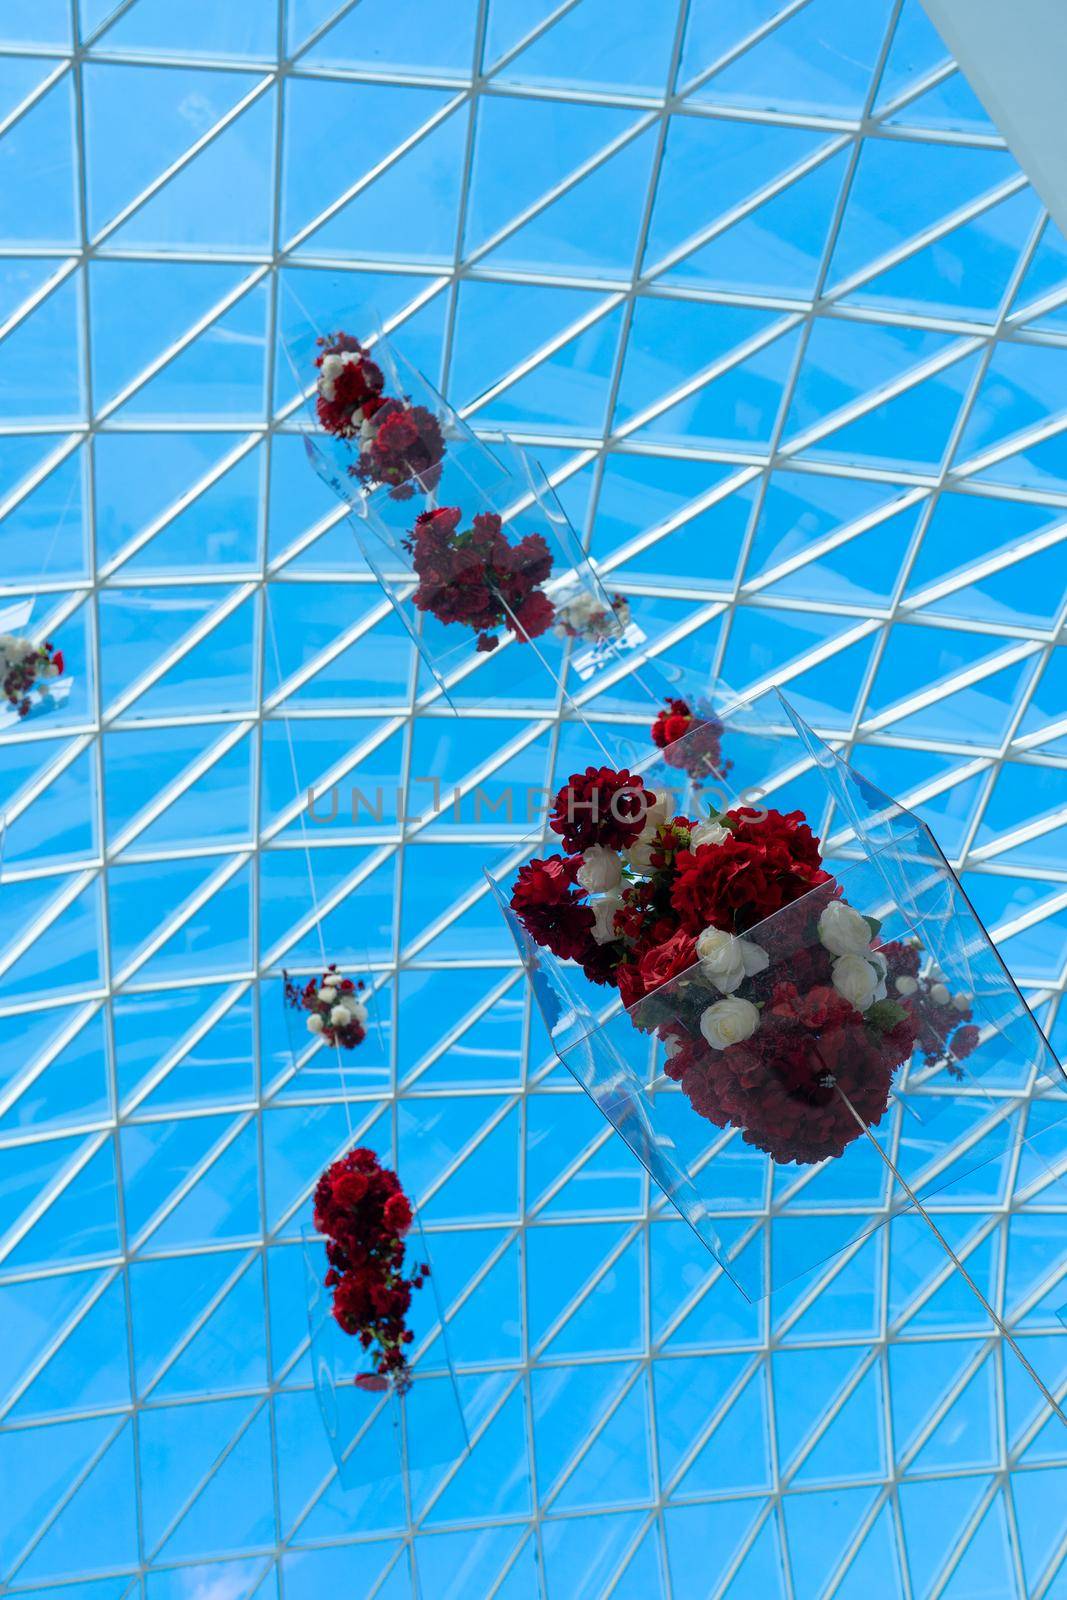 Transparent glass roof of a modern shopping center. Flower decorations are suspended under the roof of the building.